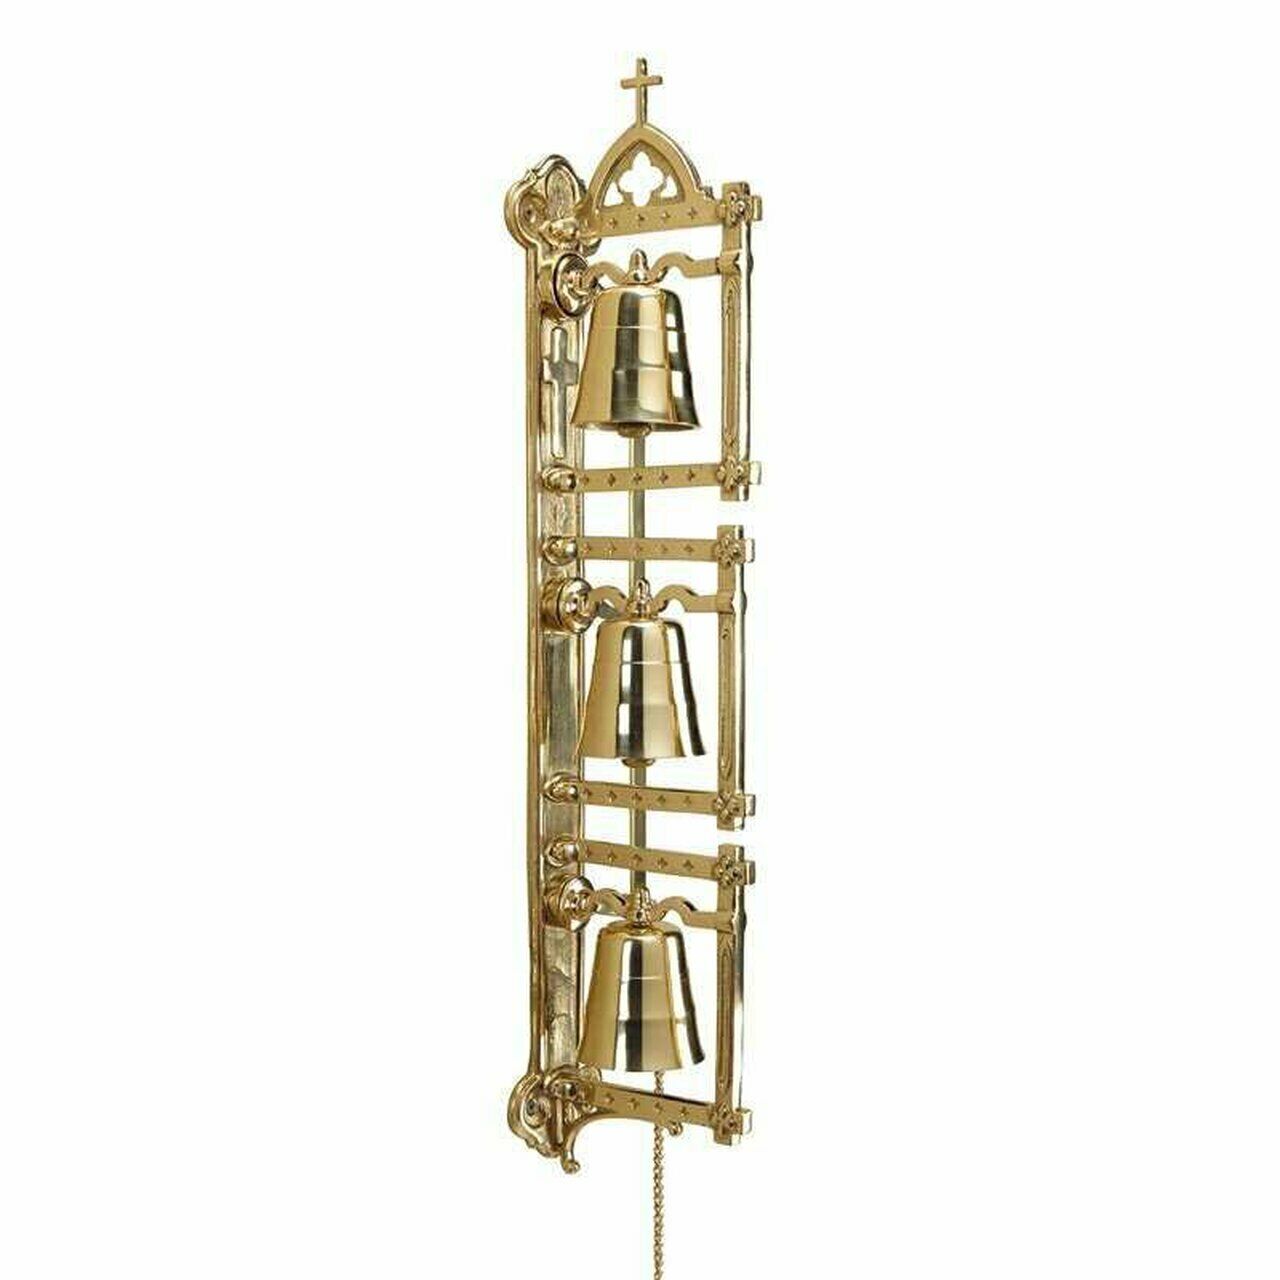 Three Tier Budded Wall Bells With Chain for Churches or Sanctuaries, 28 In